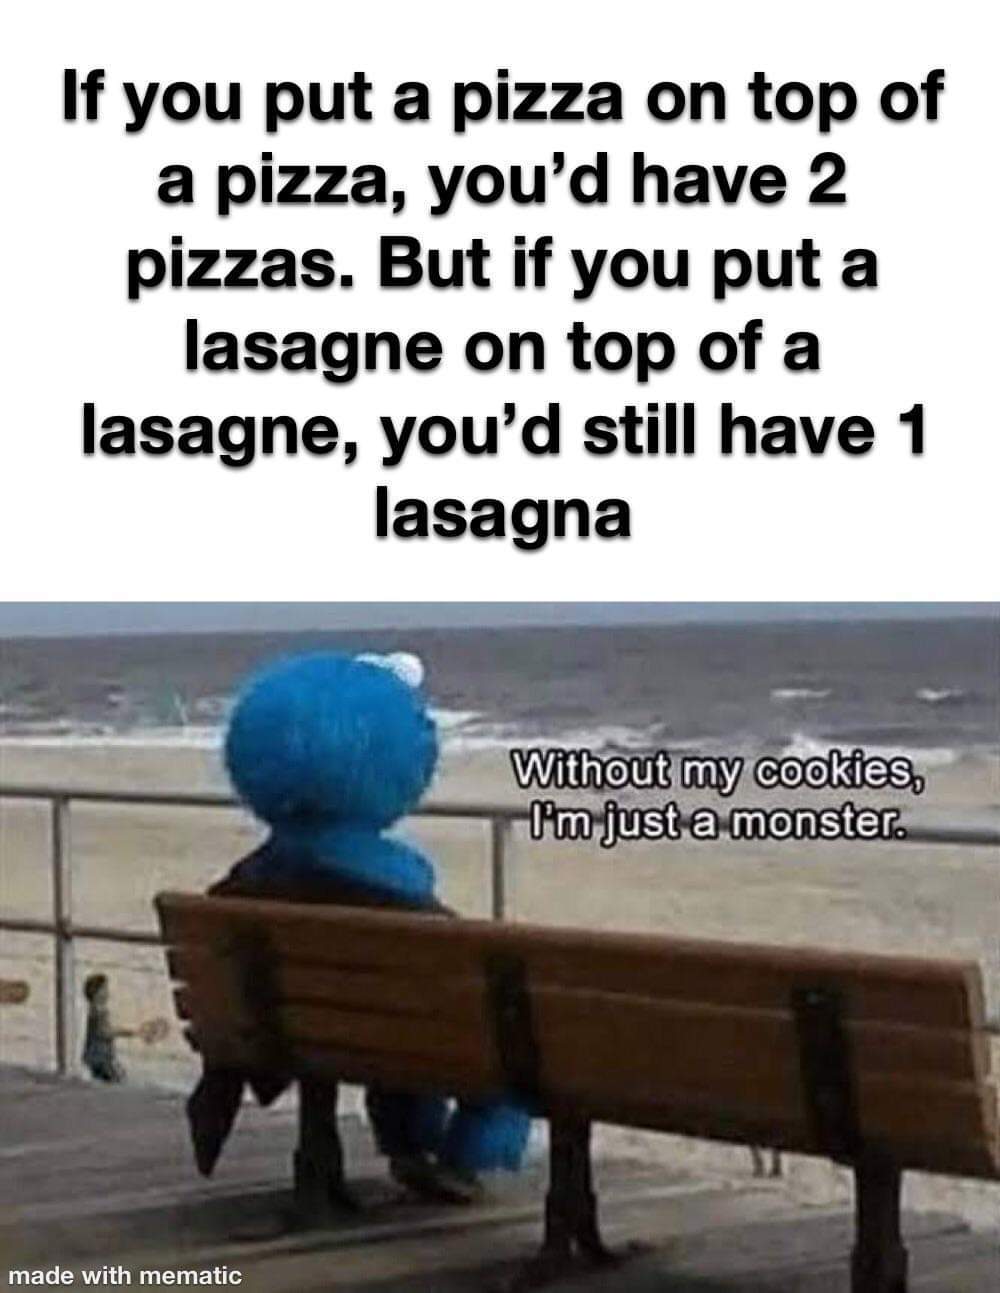 And if you put a pizza on lasagna.... - meme